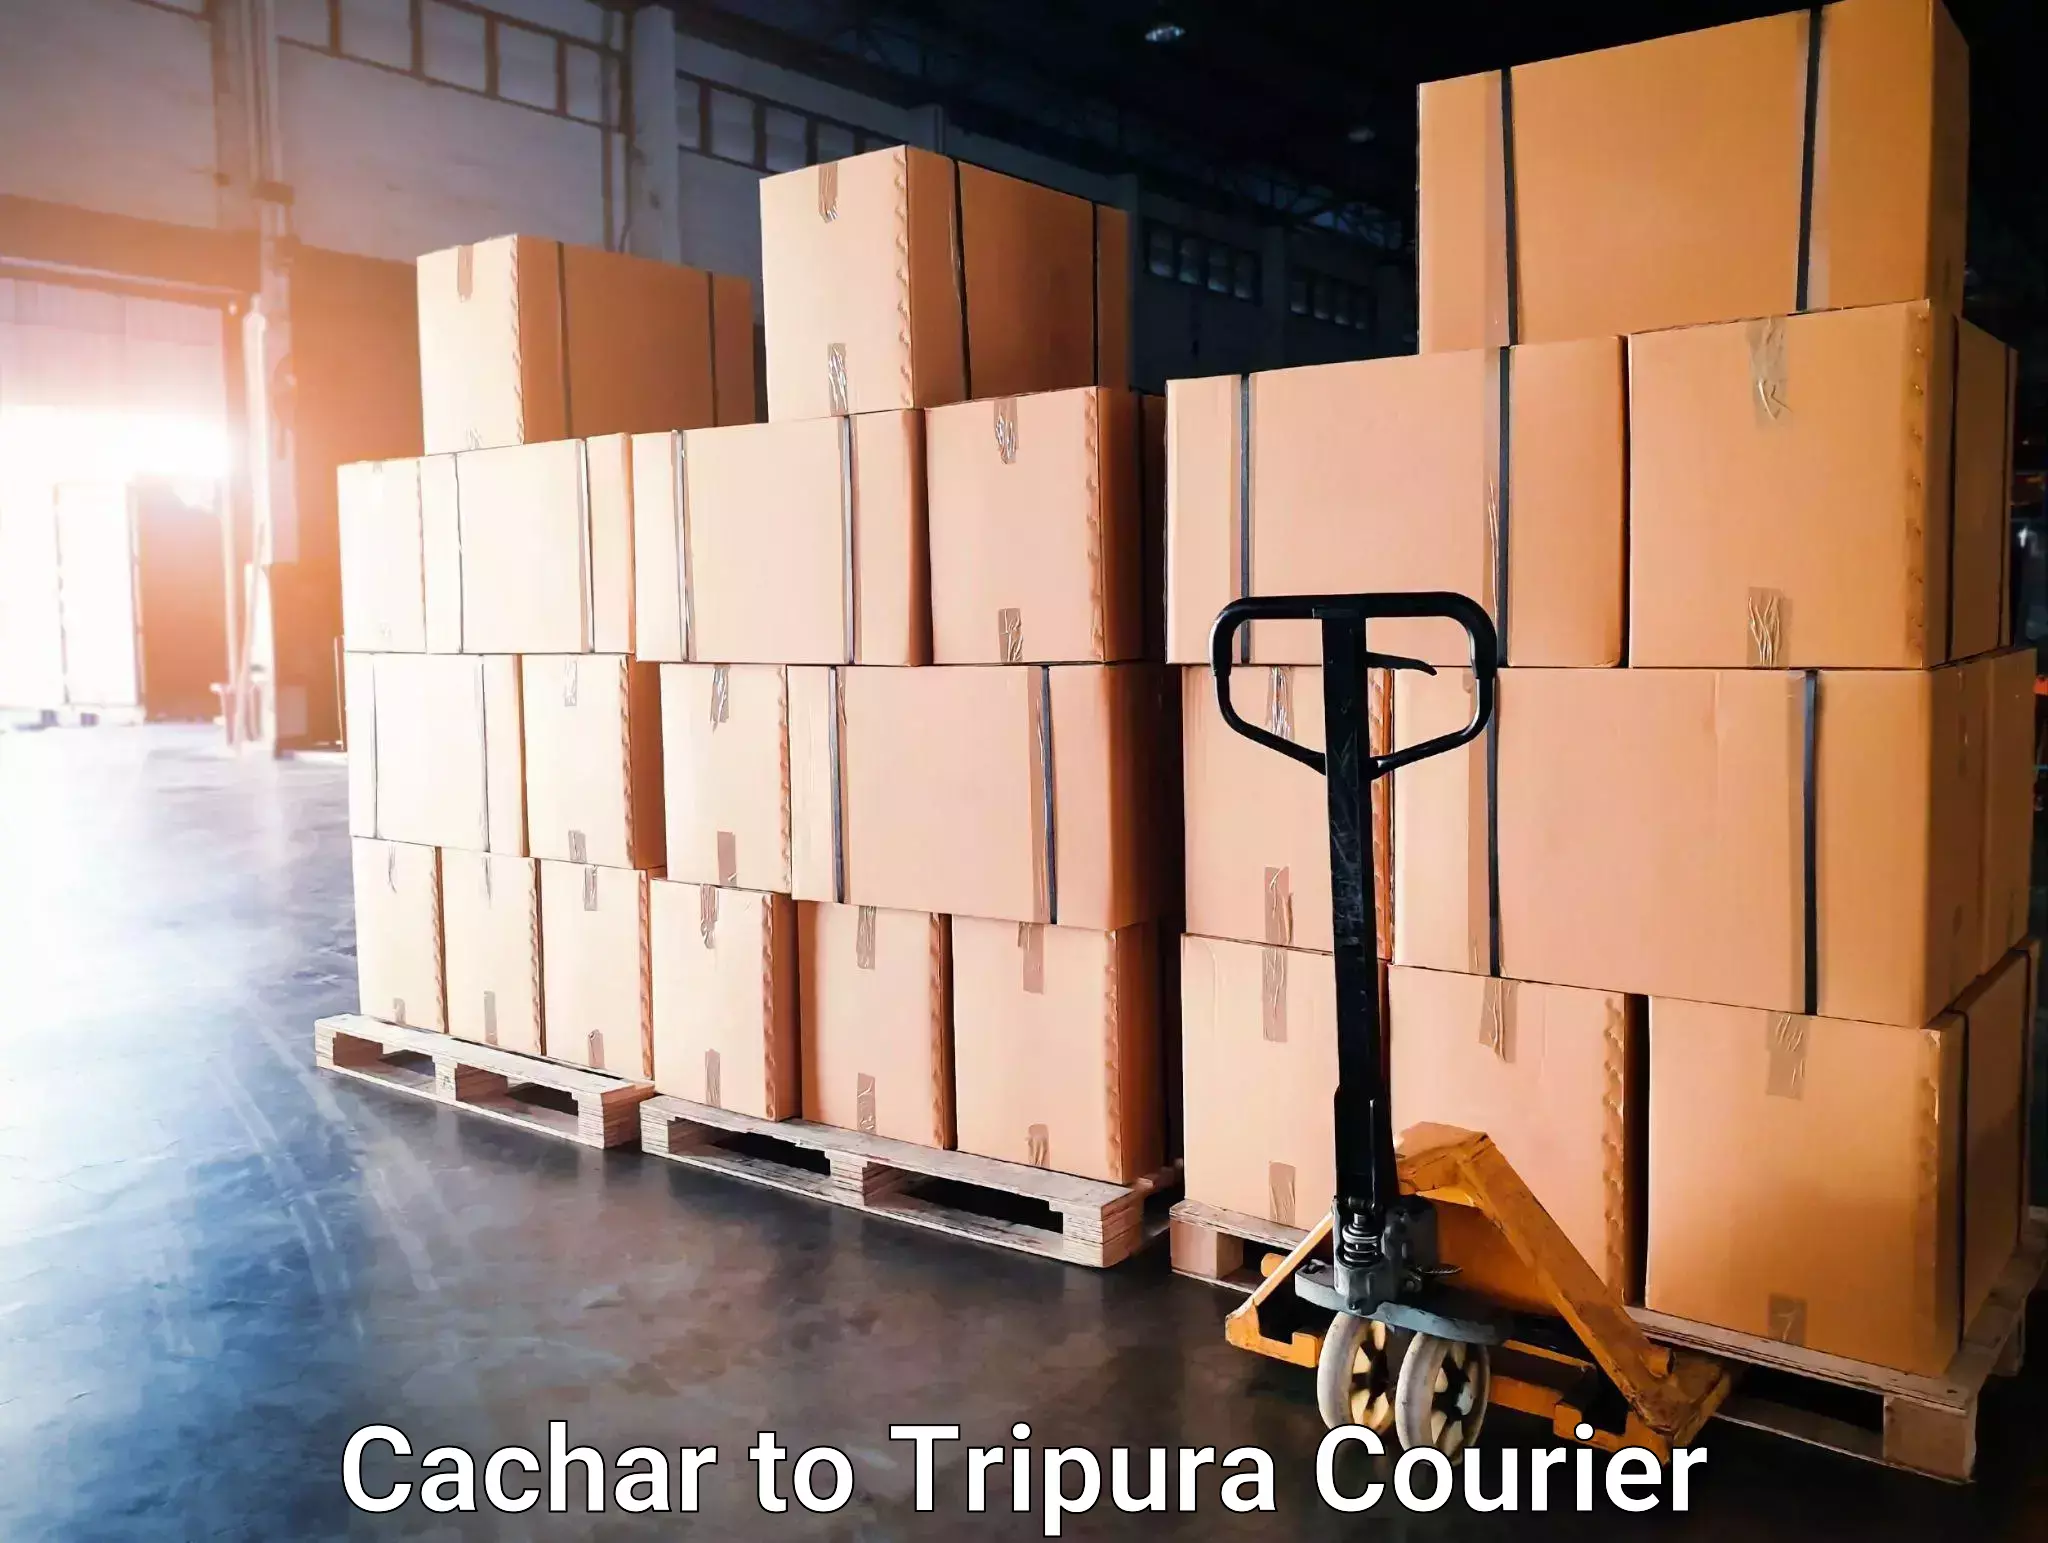 High-capacity shipping options in Cachar to Agartala